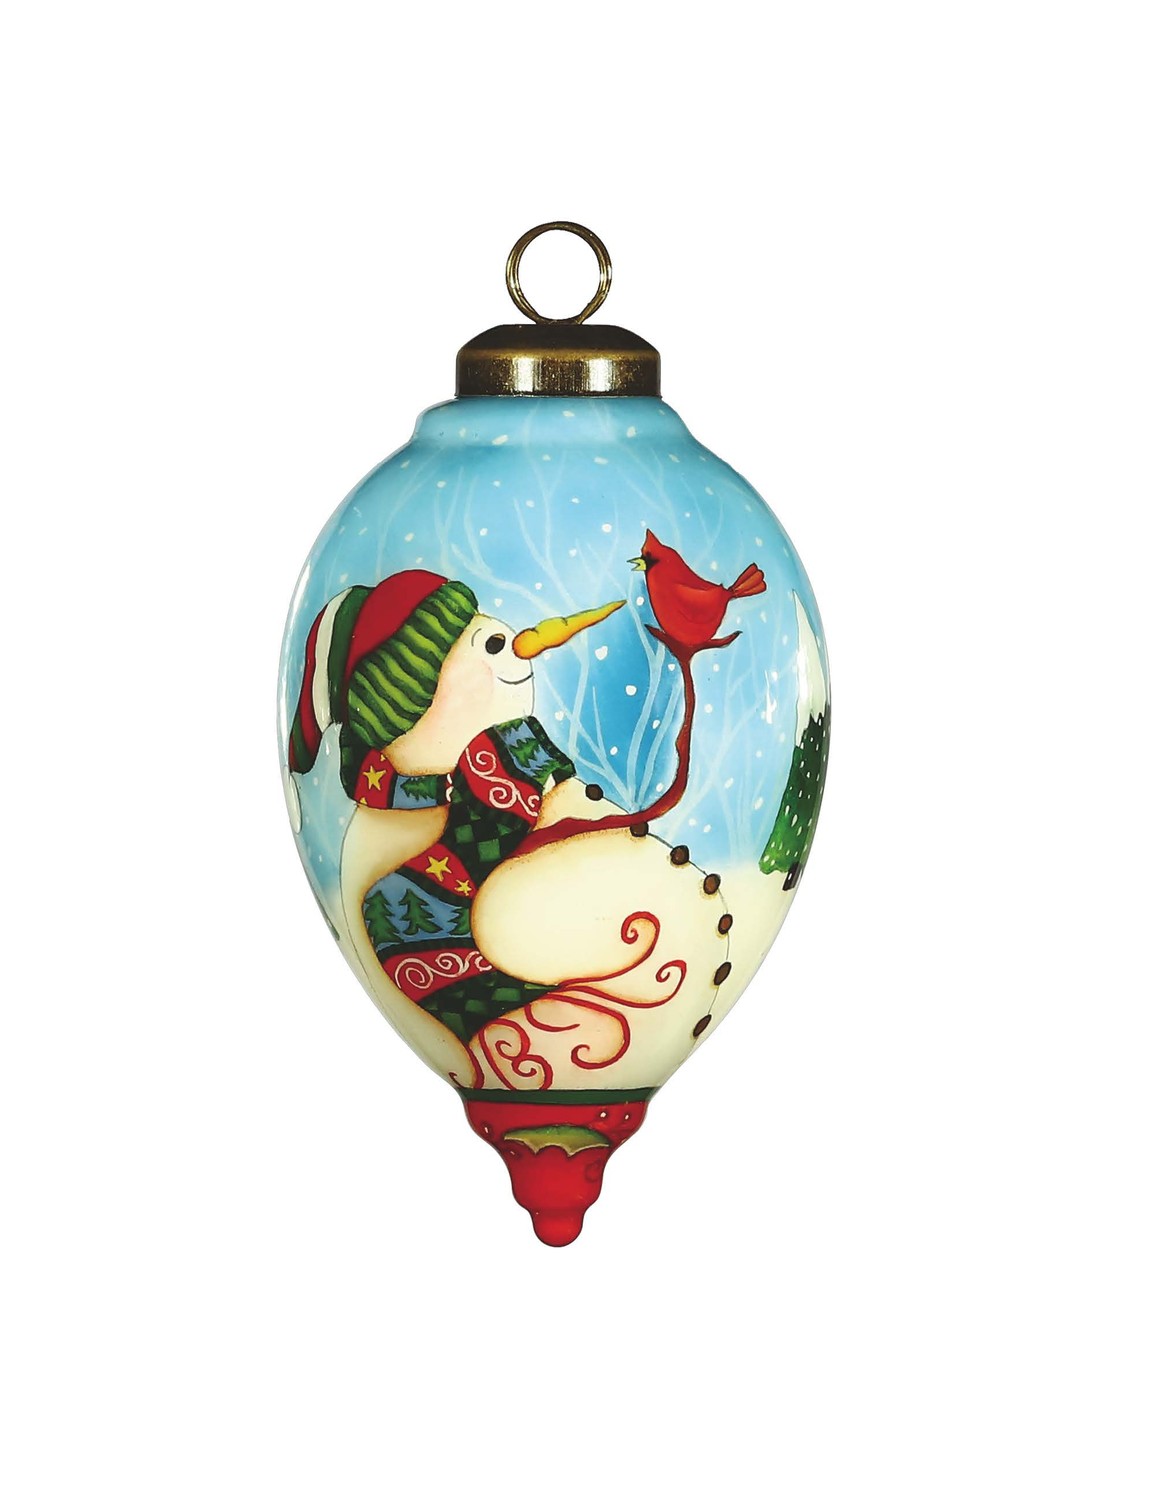 Snowman and Red Cardinal Hand Painted Mouth Blown Glass Ornament